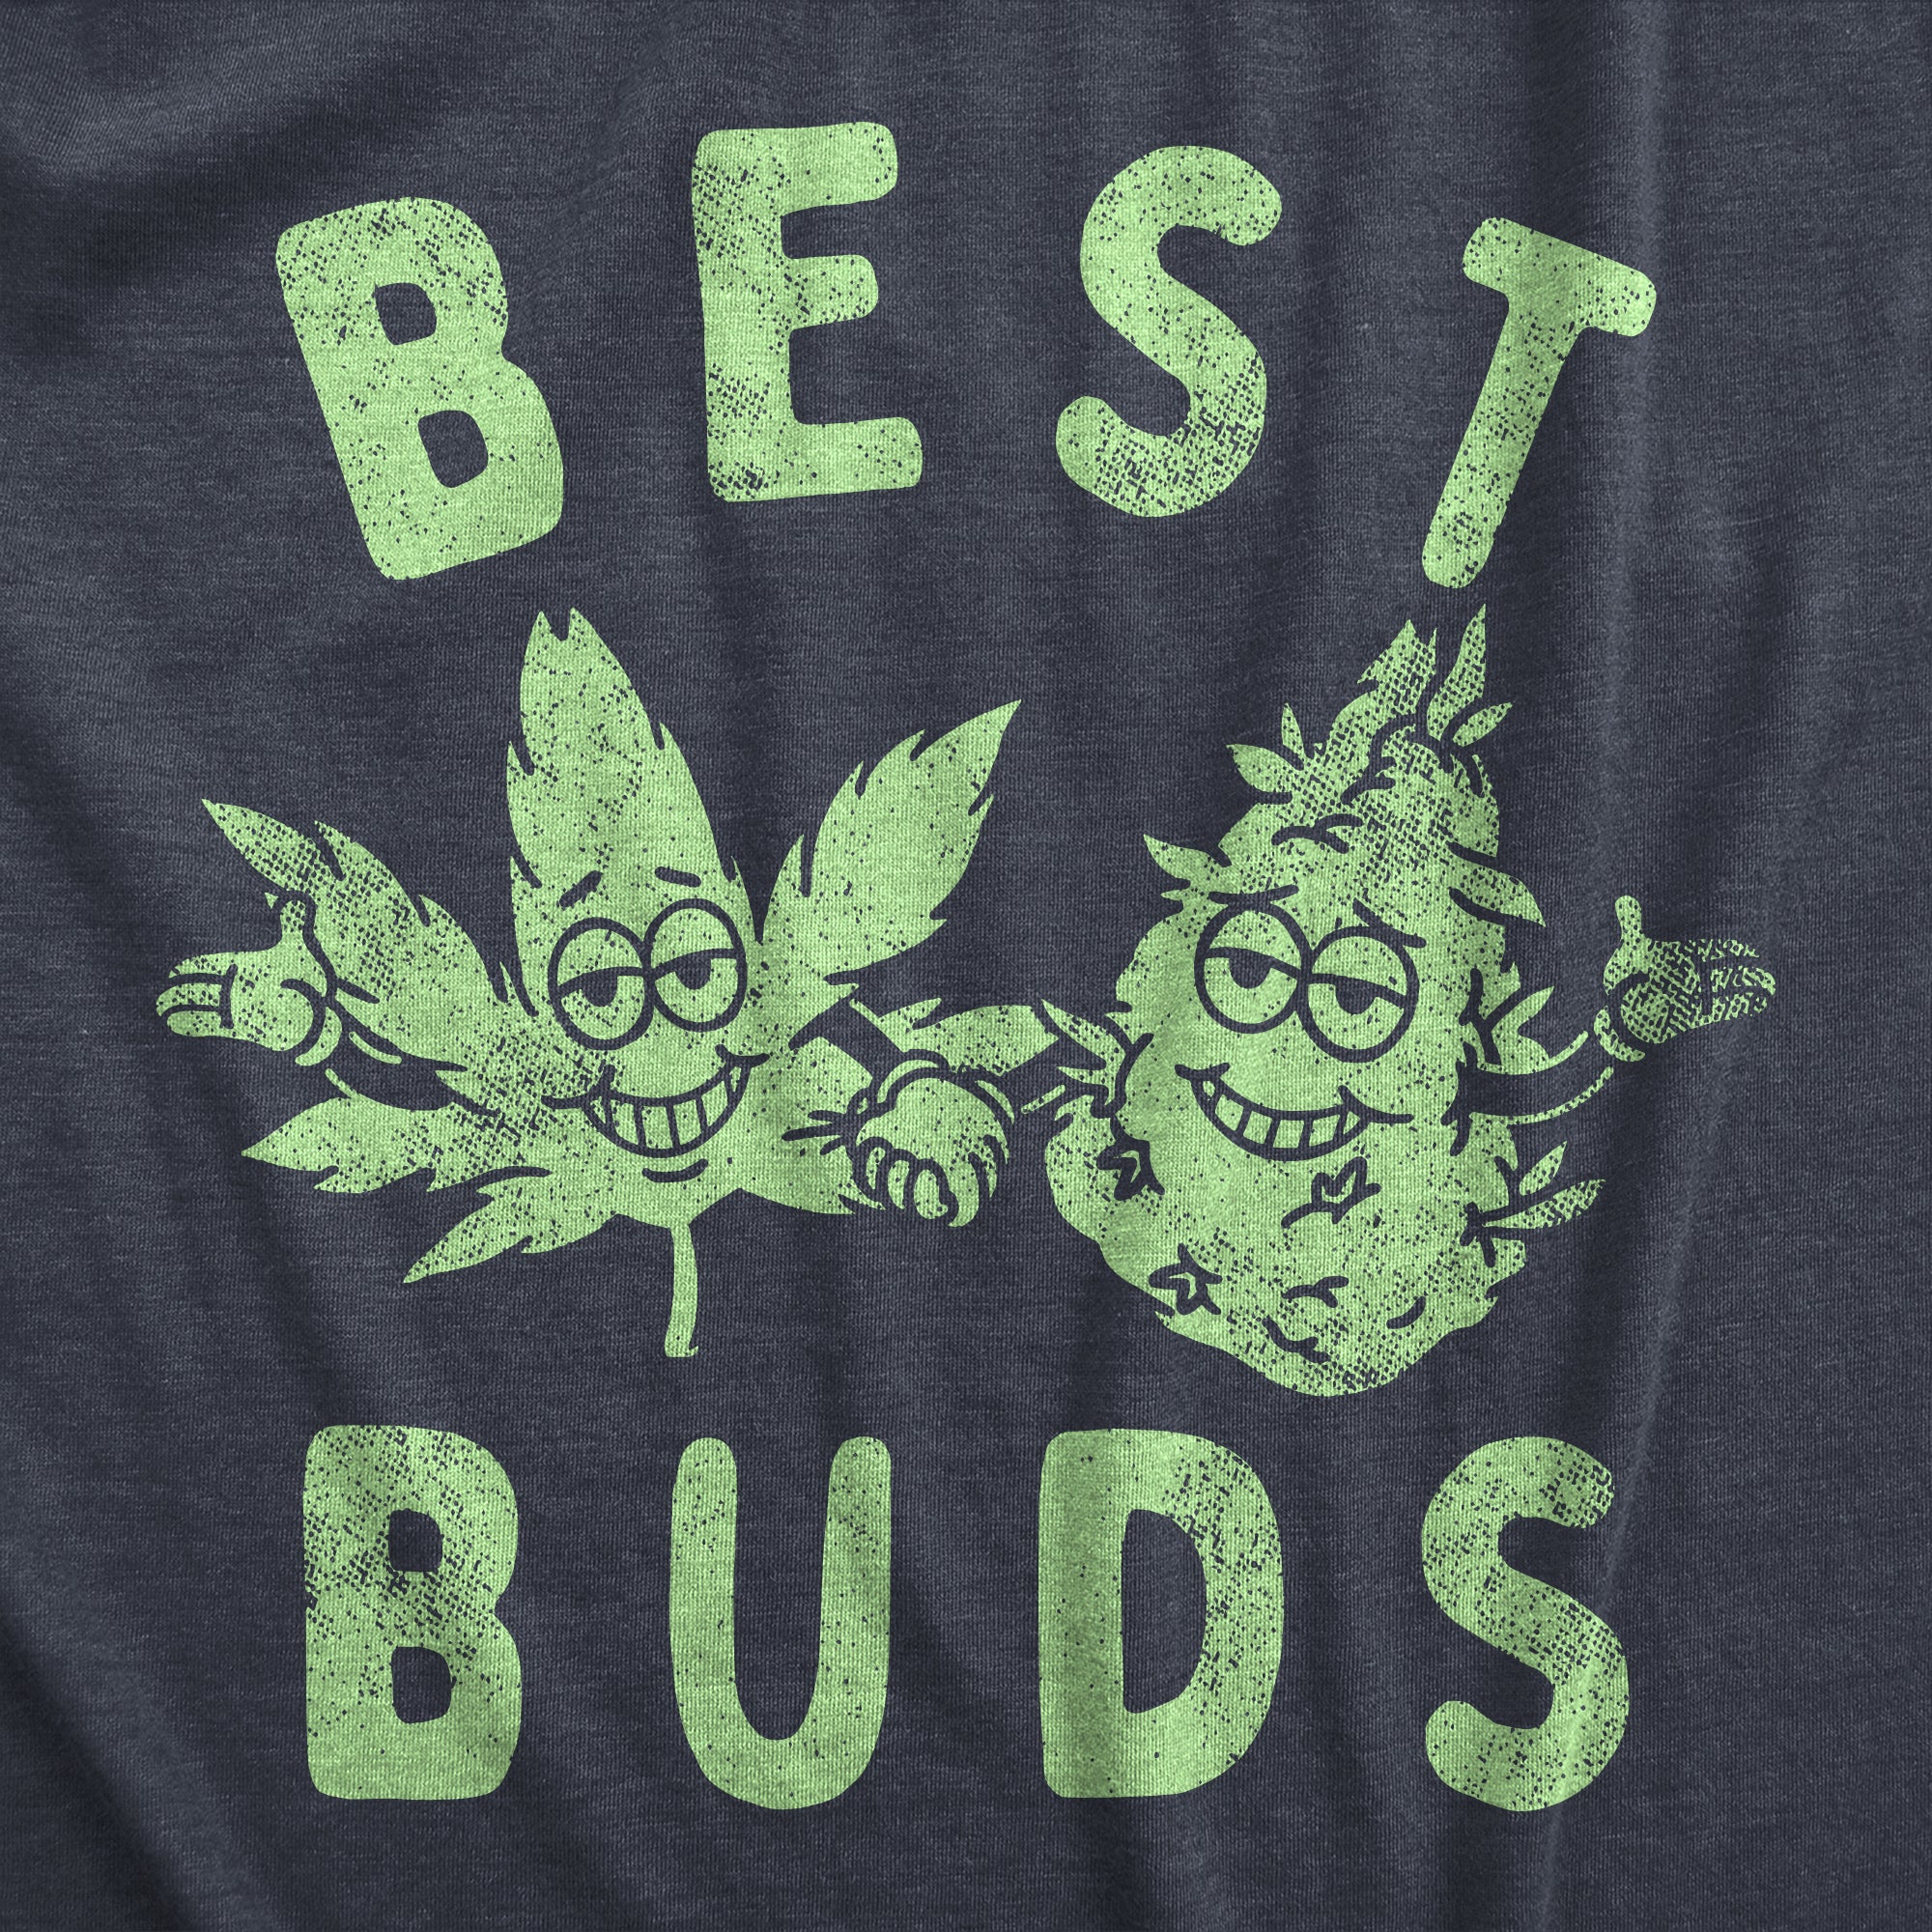 Funny Heather Navy - BUDS Best Buds Mens T Shirt Nerdy 420 Sarcastic Tee